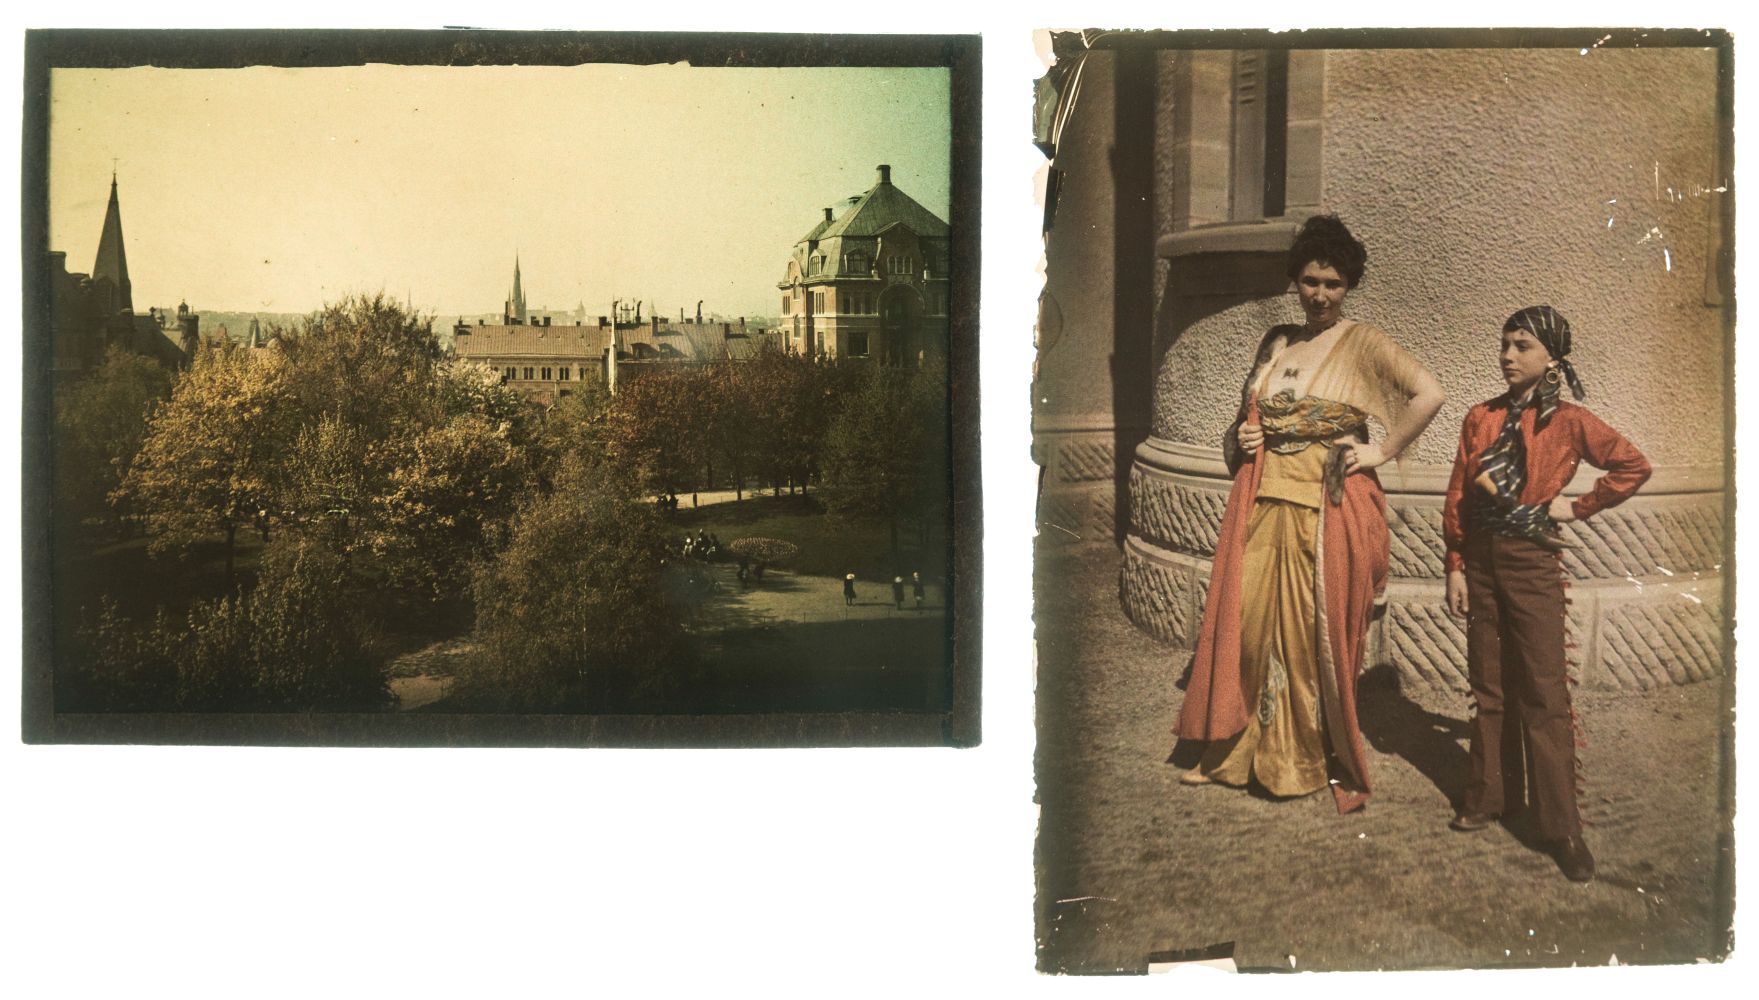 Autochromes. A group of 3 quarter-plate autochromes, early 20th century